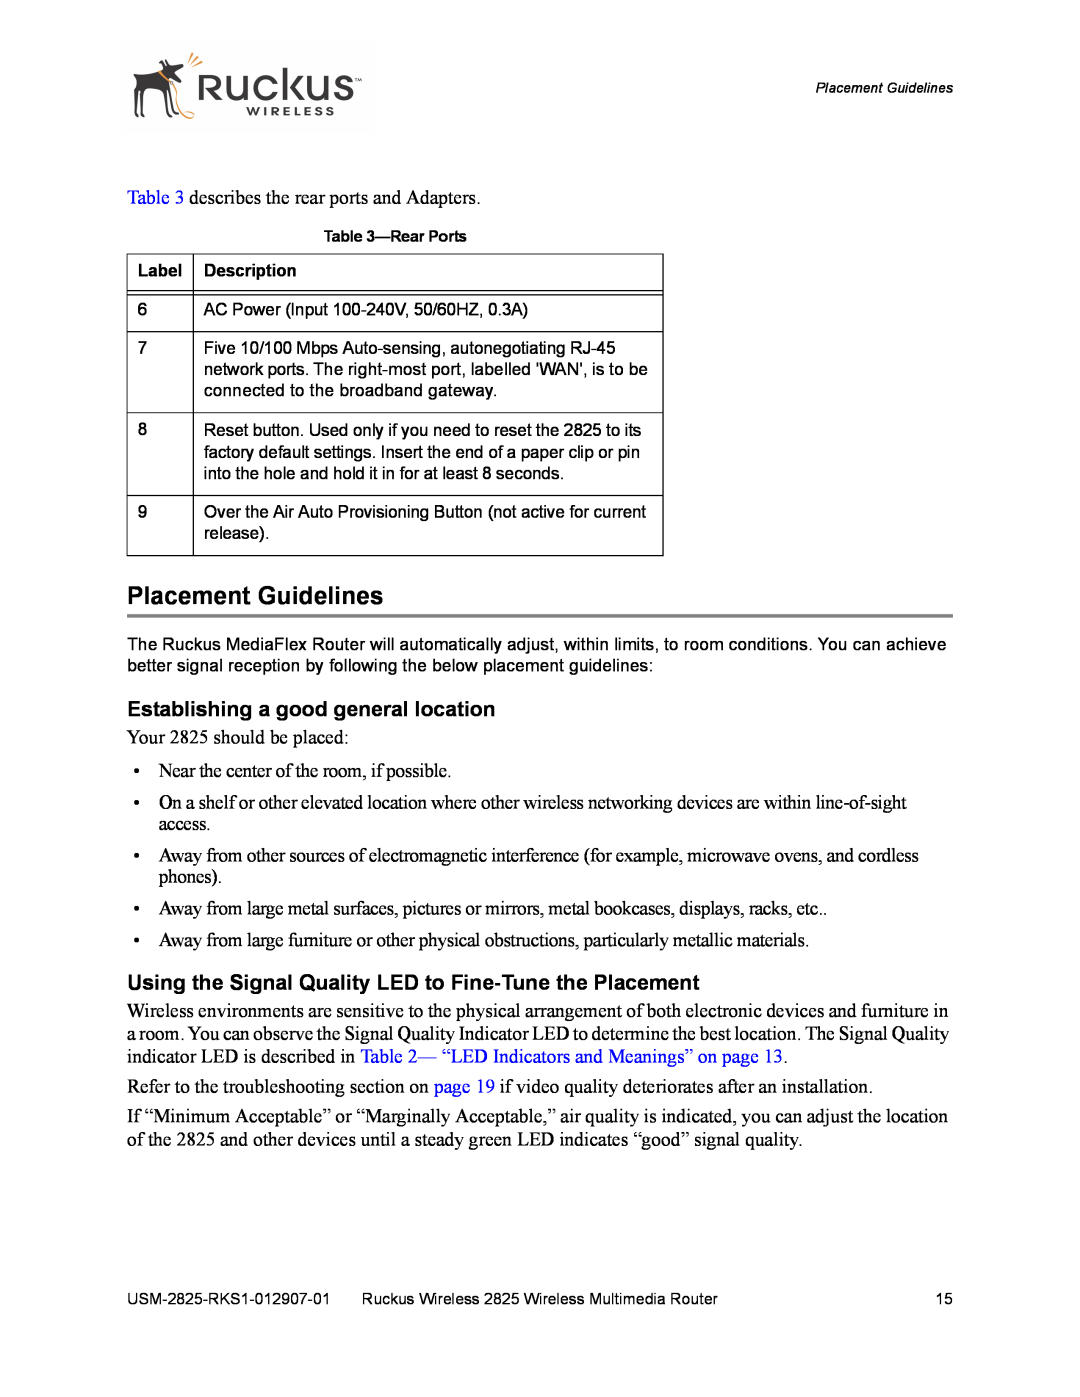 Ruckus Wireless 2111, 2825 manual Placement Guidelines, Establishing a good general location 